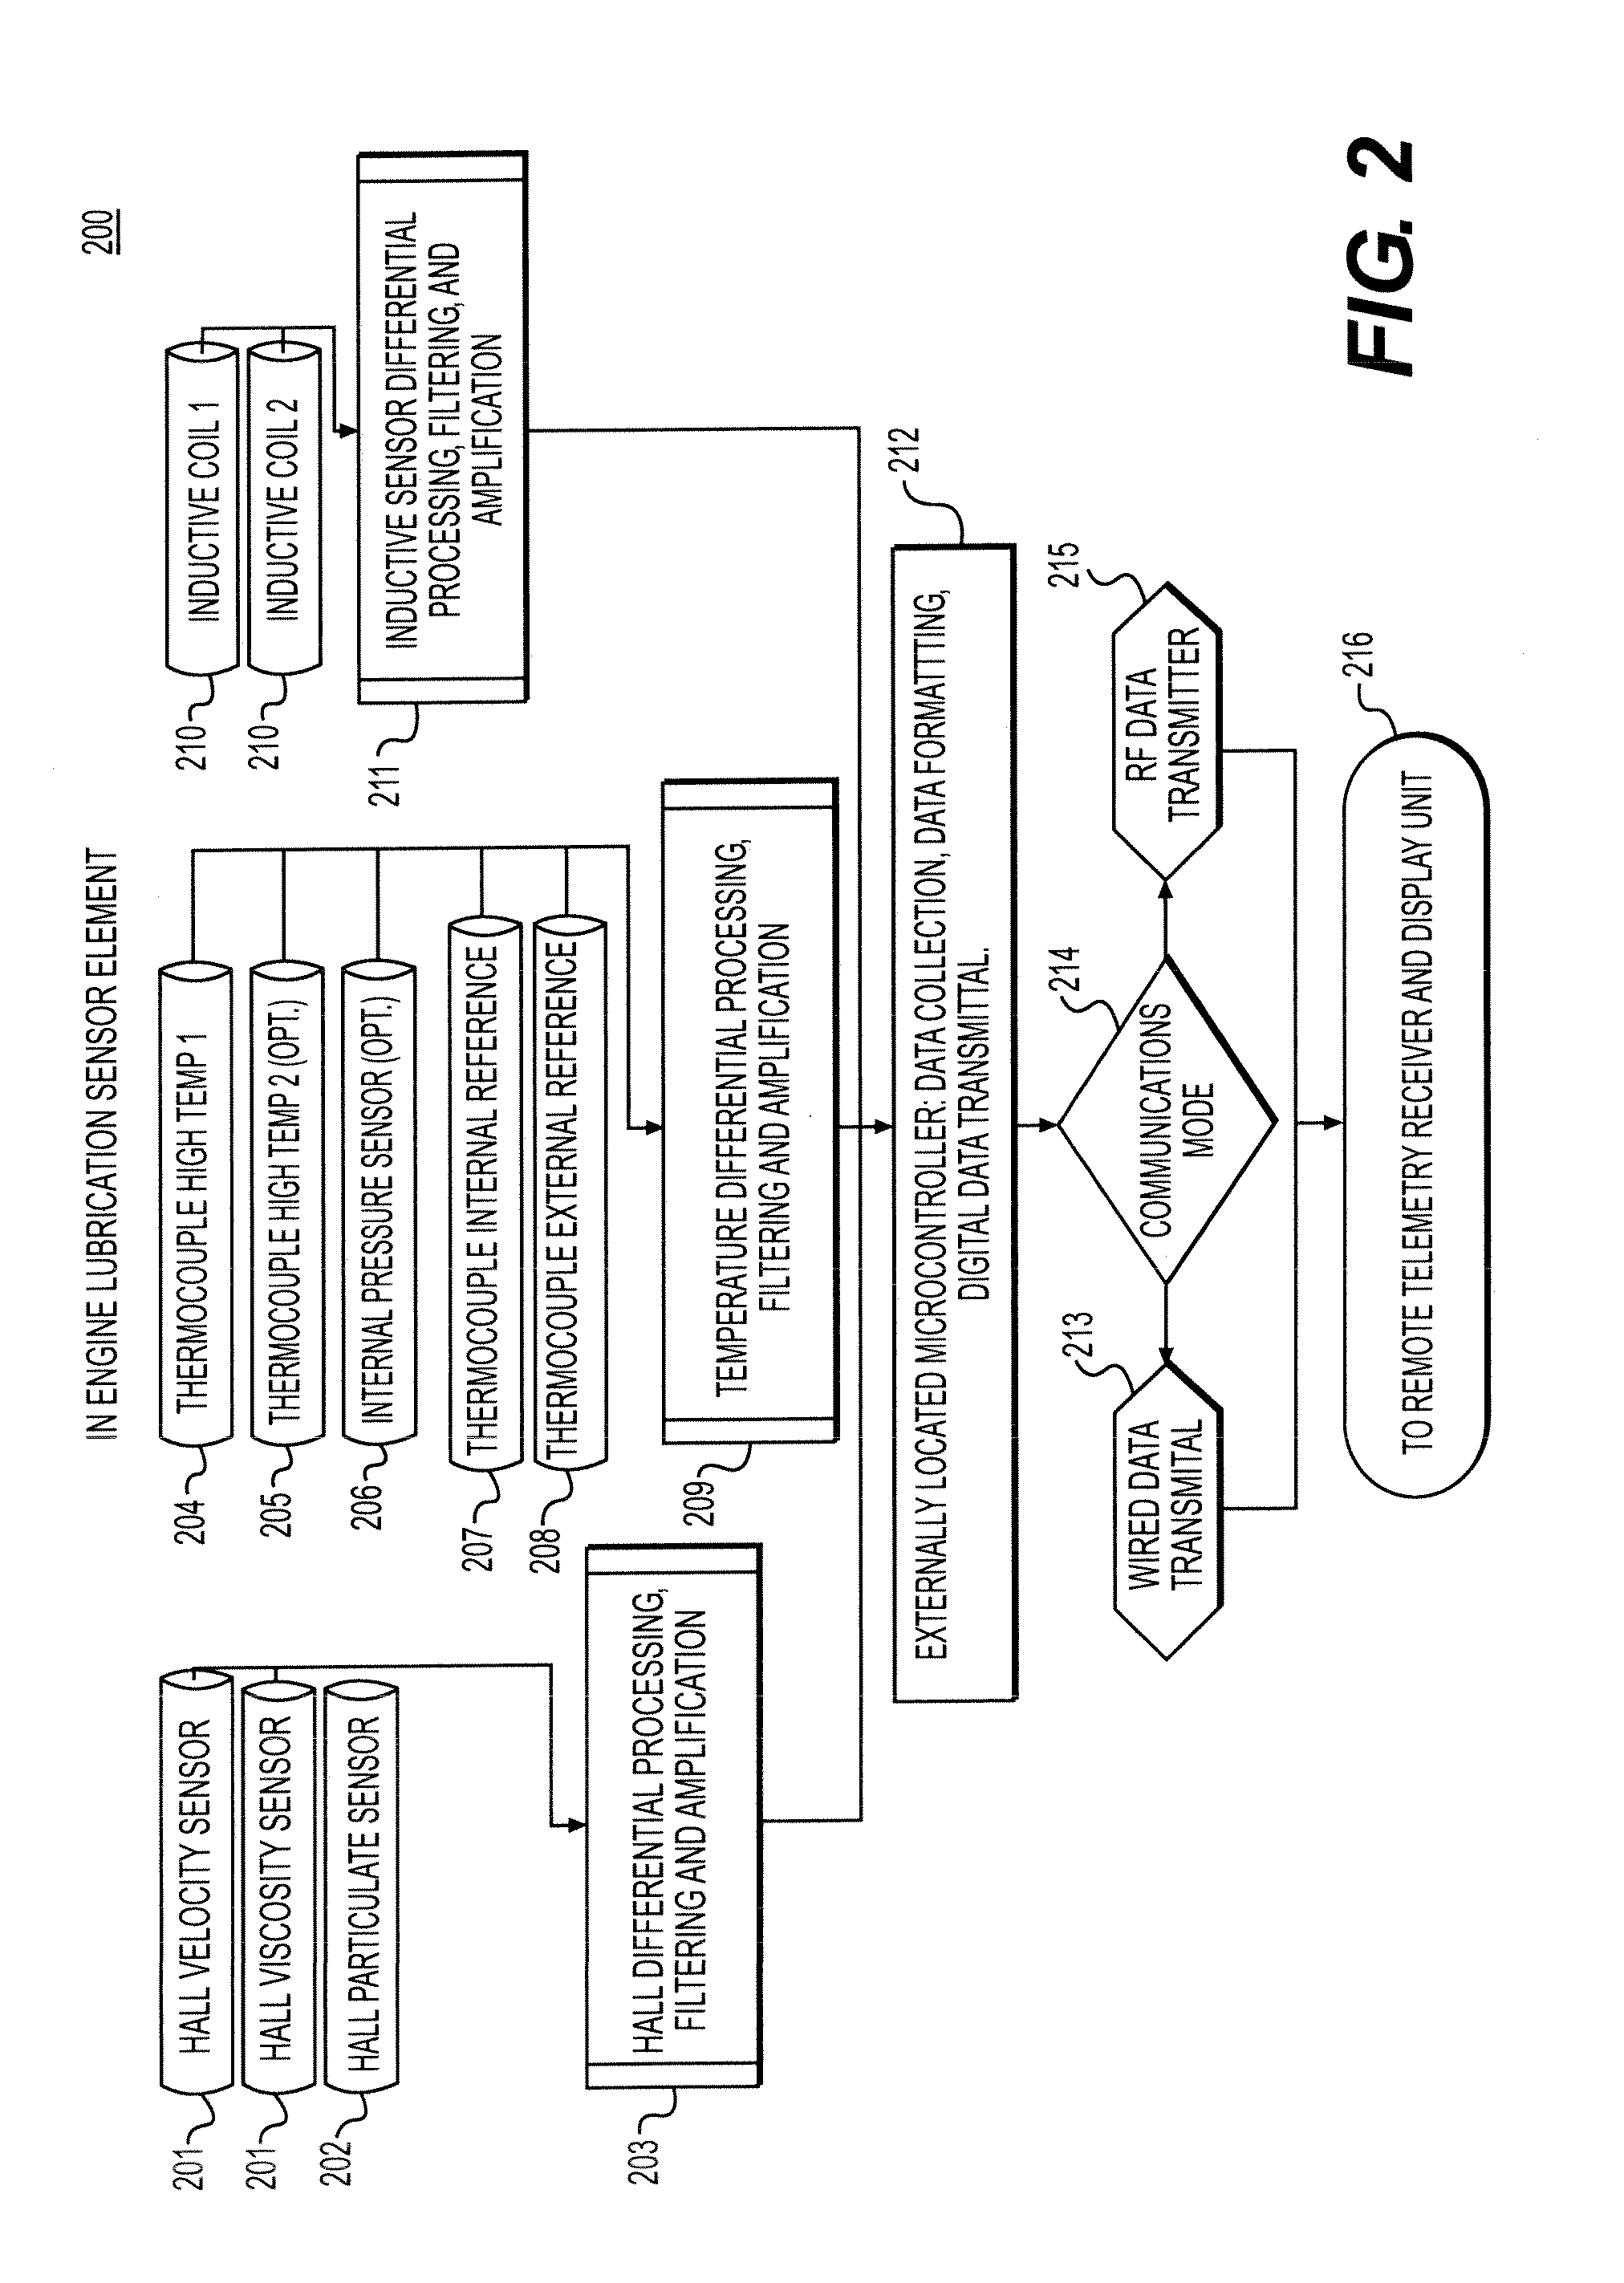 Hall Effect-Based Real-Time Lubrication Monitoring System Modes of Operation and Use Thereof